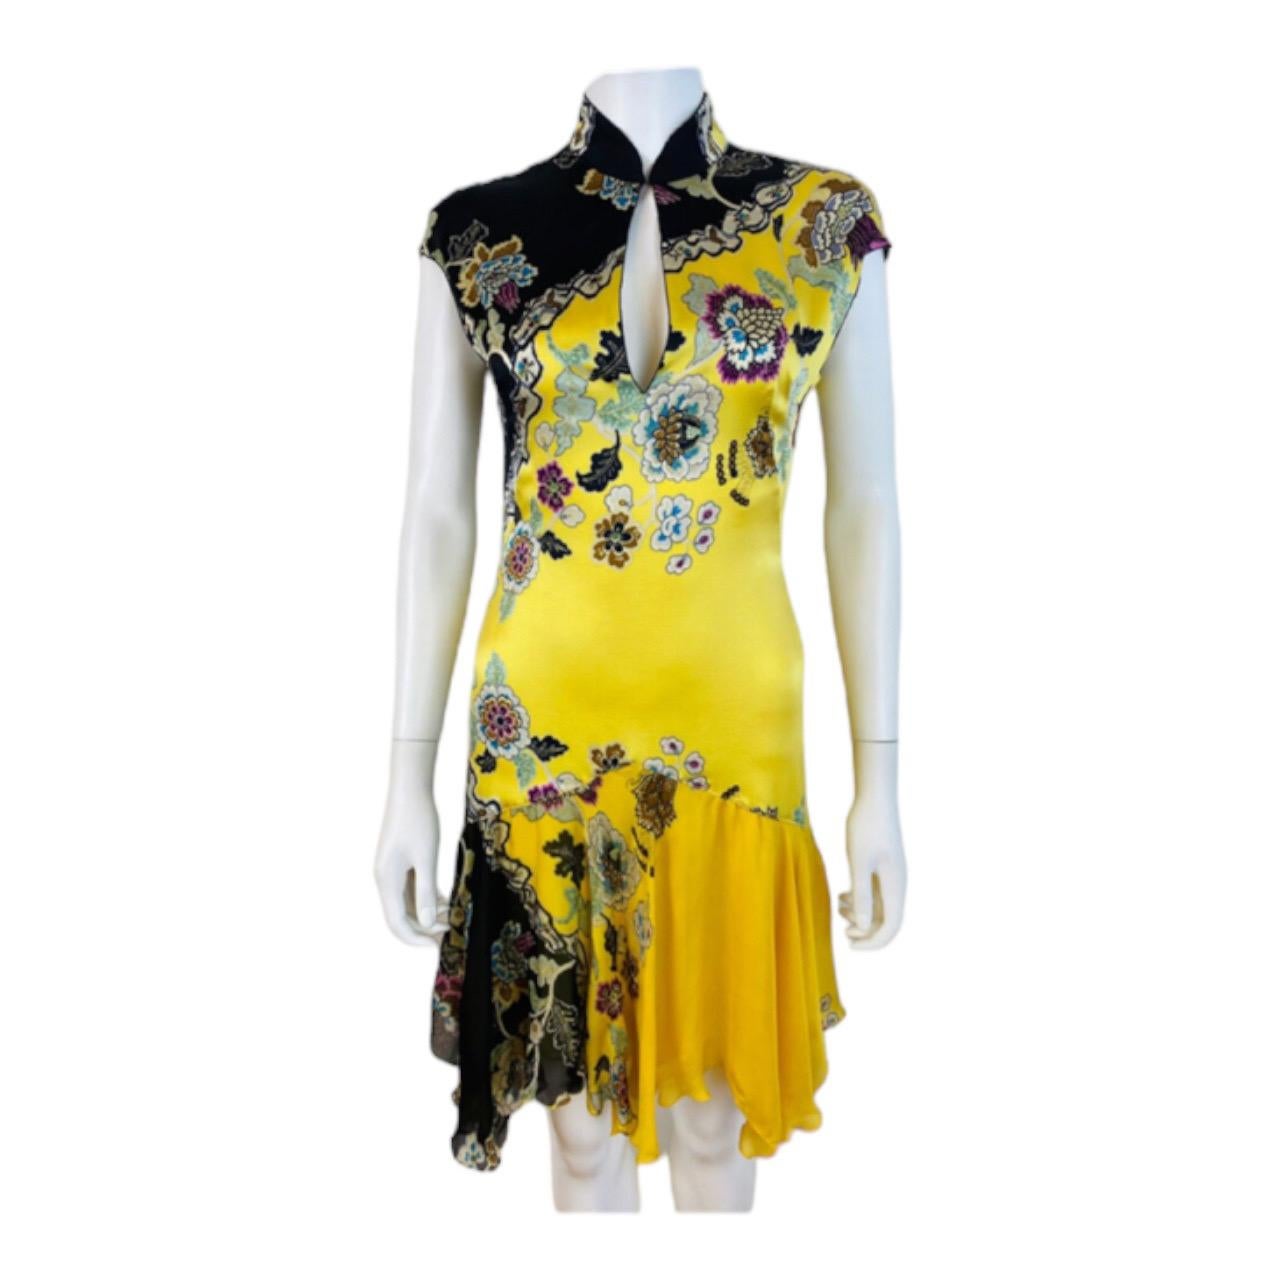 Vintage Roberto Cavalli S/S 2003 Chinoiserie Yellow Floral Silk Mini Dress In Good Condition For Sale In Denver, CO